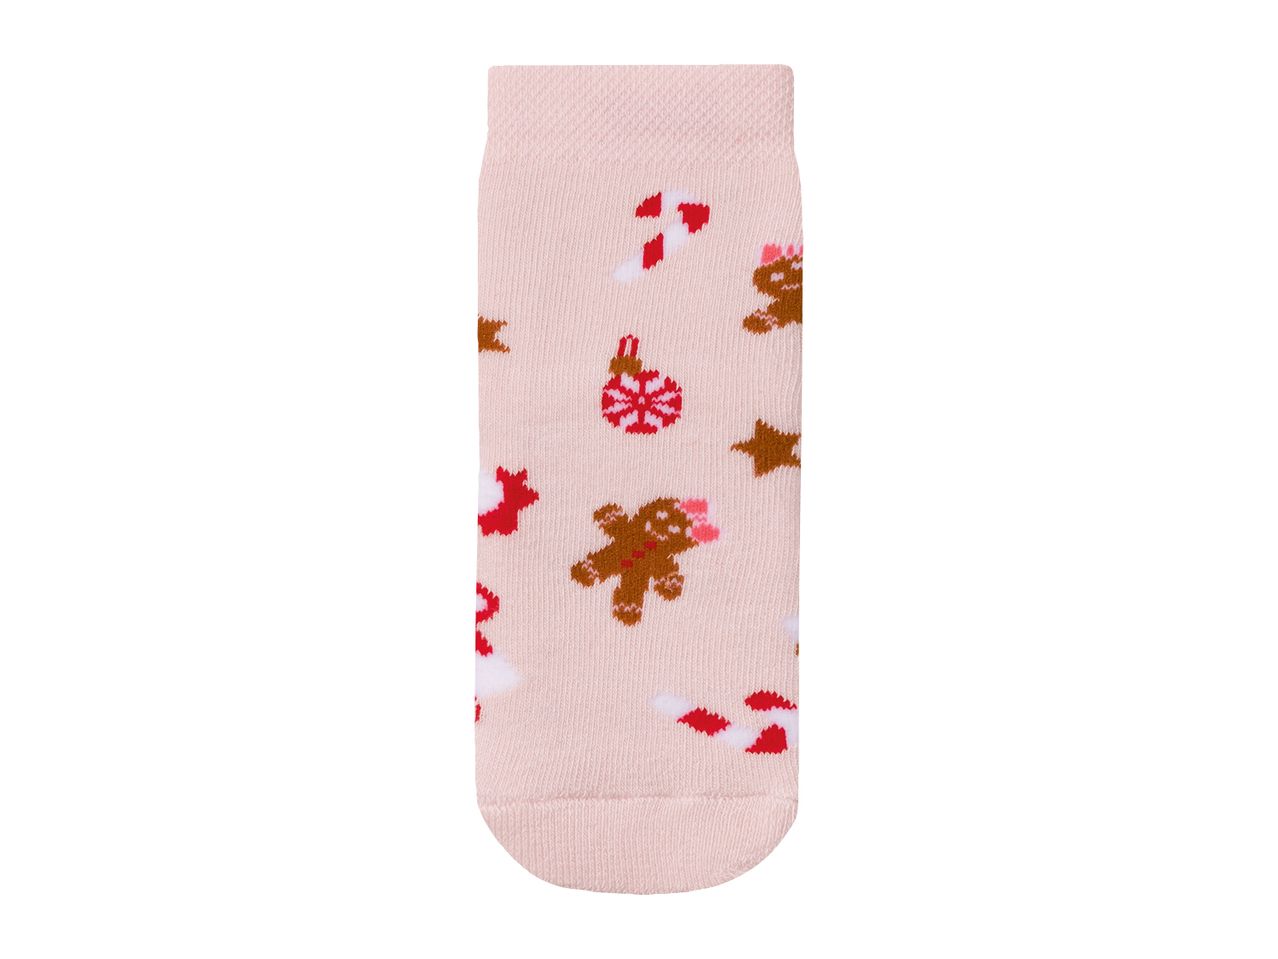 Go to full screen view: Lupilu Younger Kids’ Christmas Thermal Socks - 2 pairs - Image 2